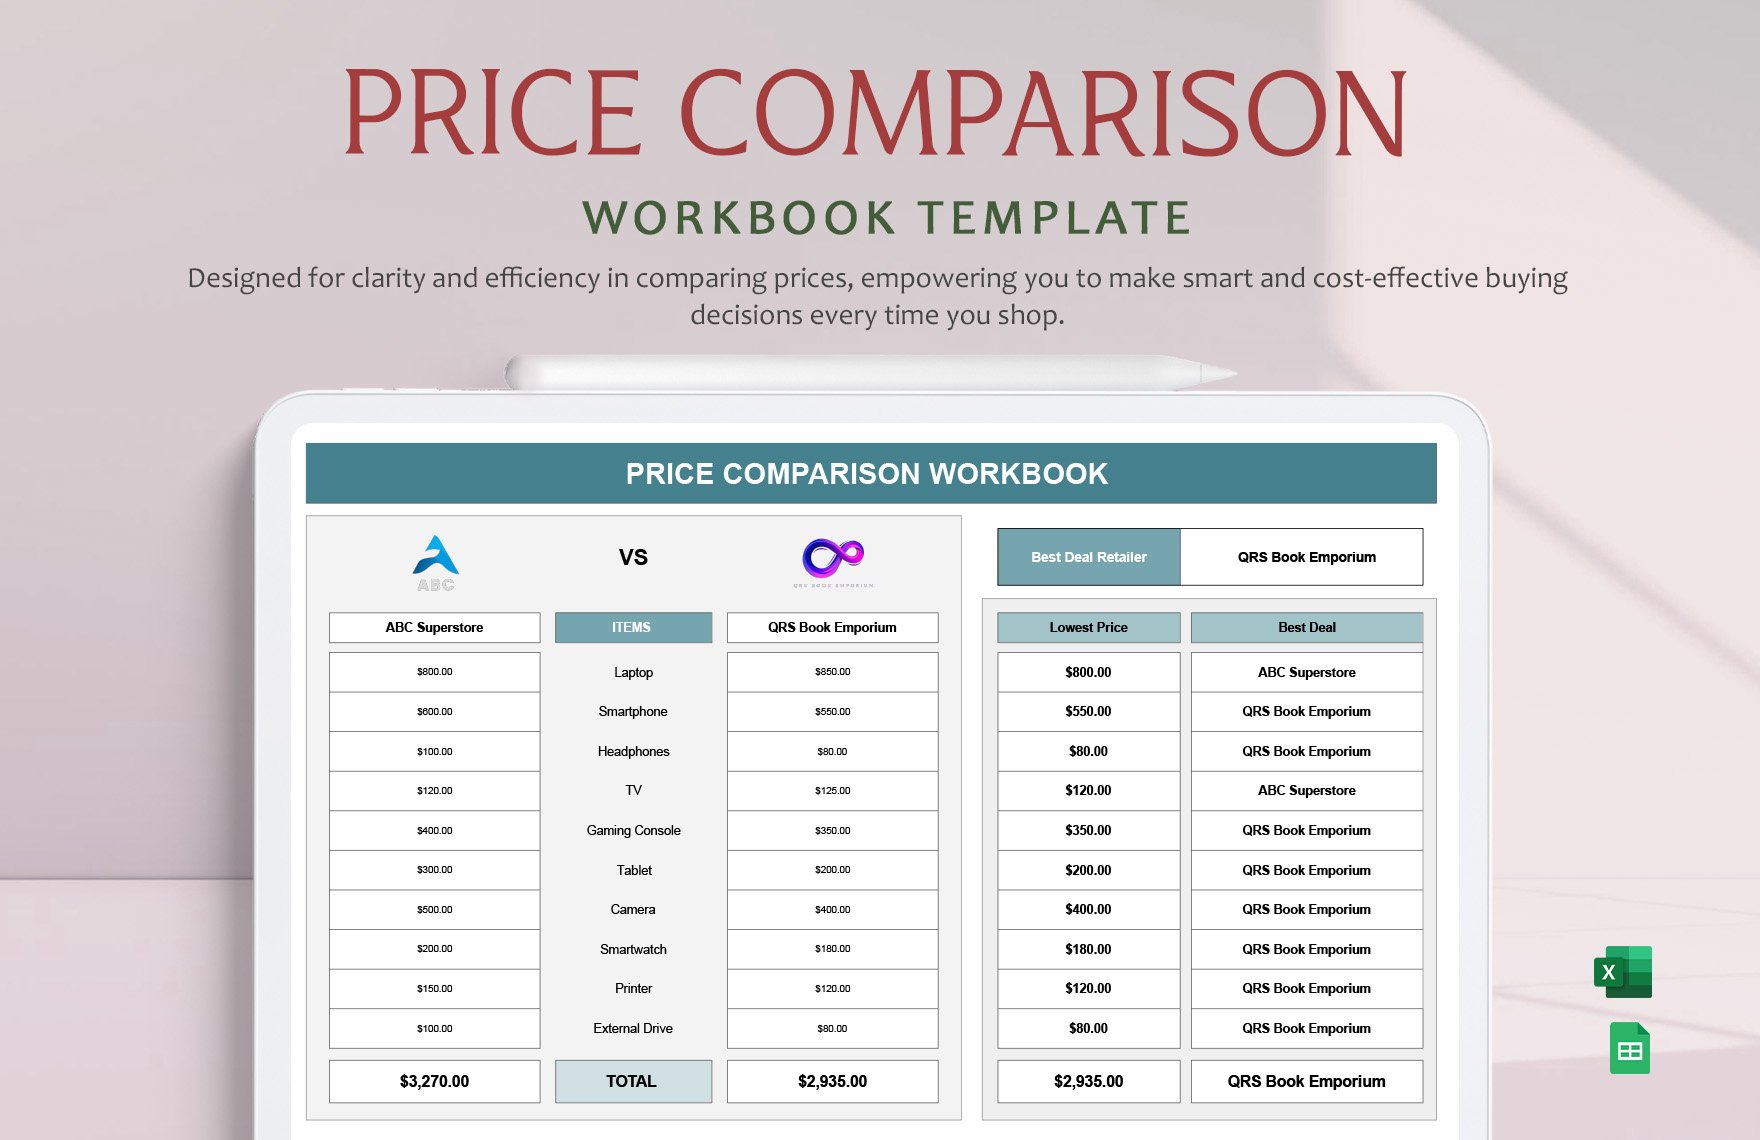 Price Comparison Workbook Template in Excel, Google Sheets